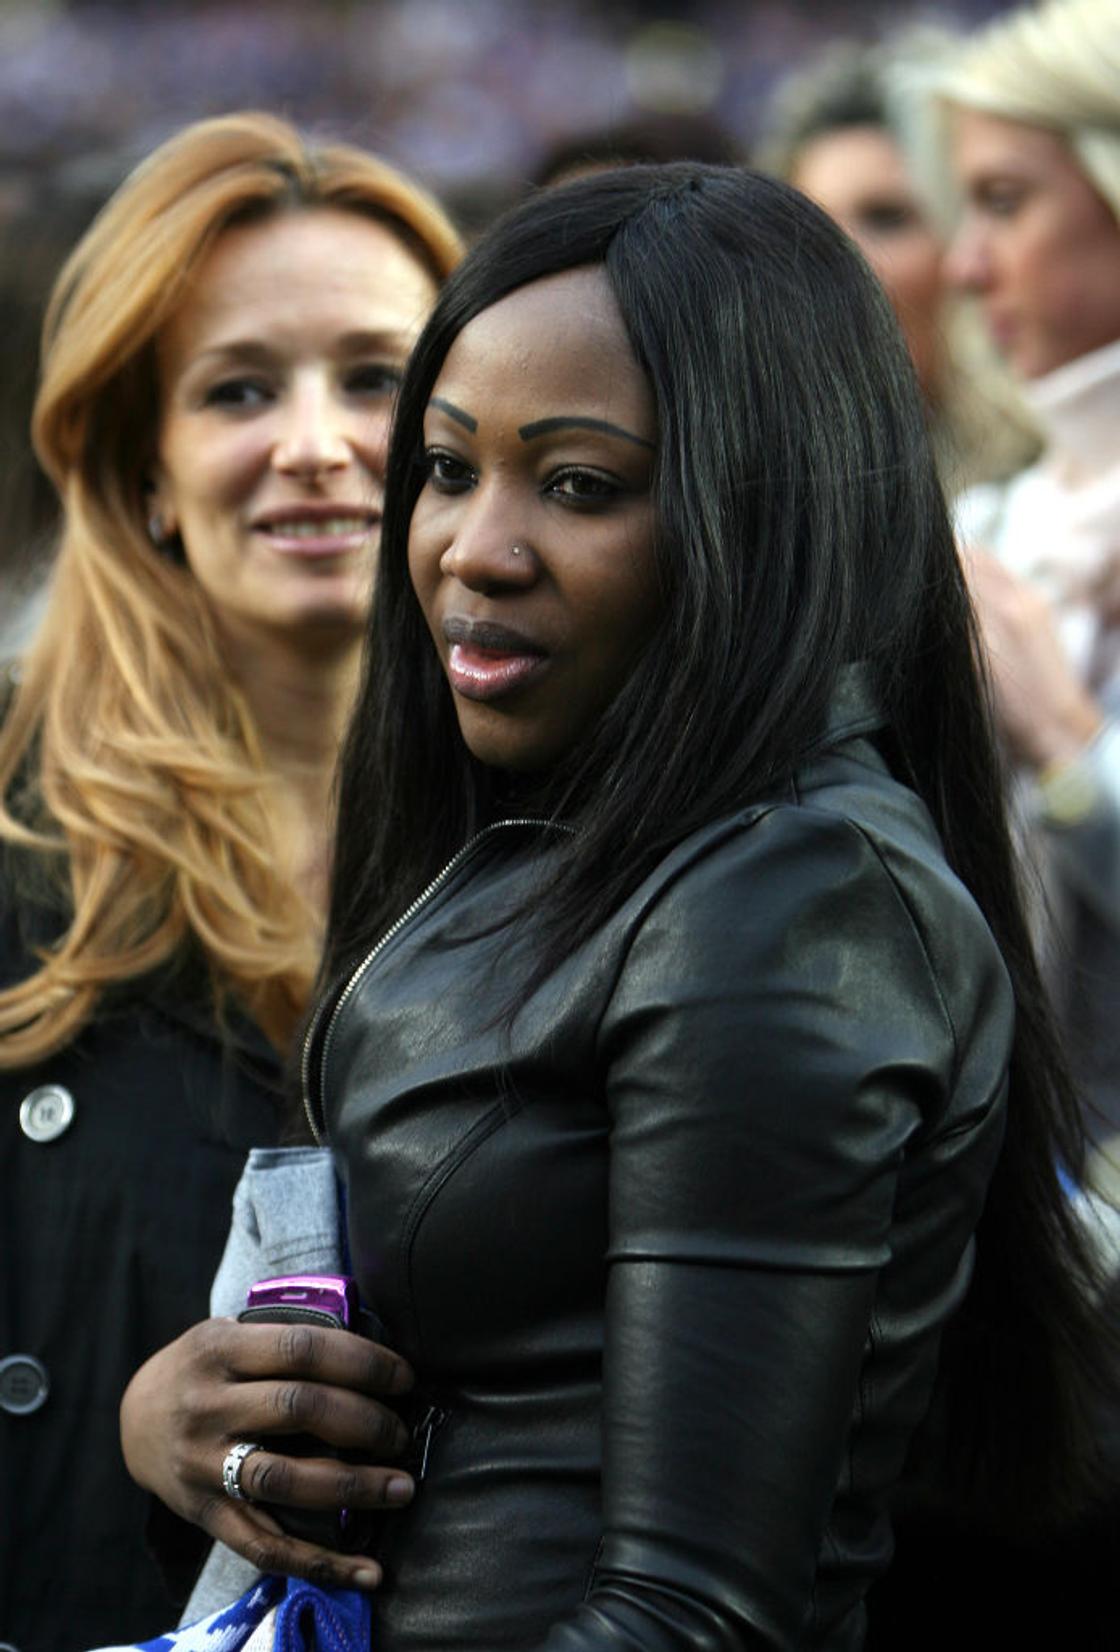 Didier Drogba's ex wife Lalla during a Chelsea Vs Wigan Athletic game at Stamford Bridge. Photo: Mike Egerton